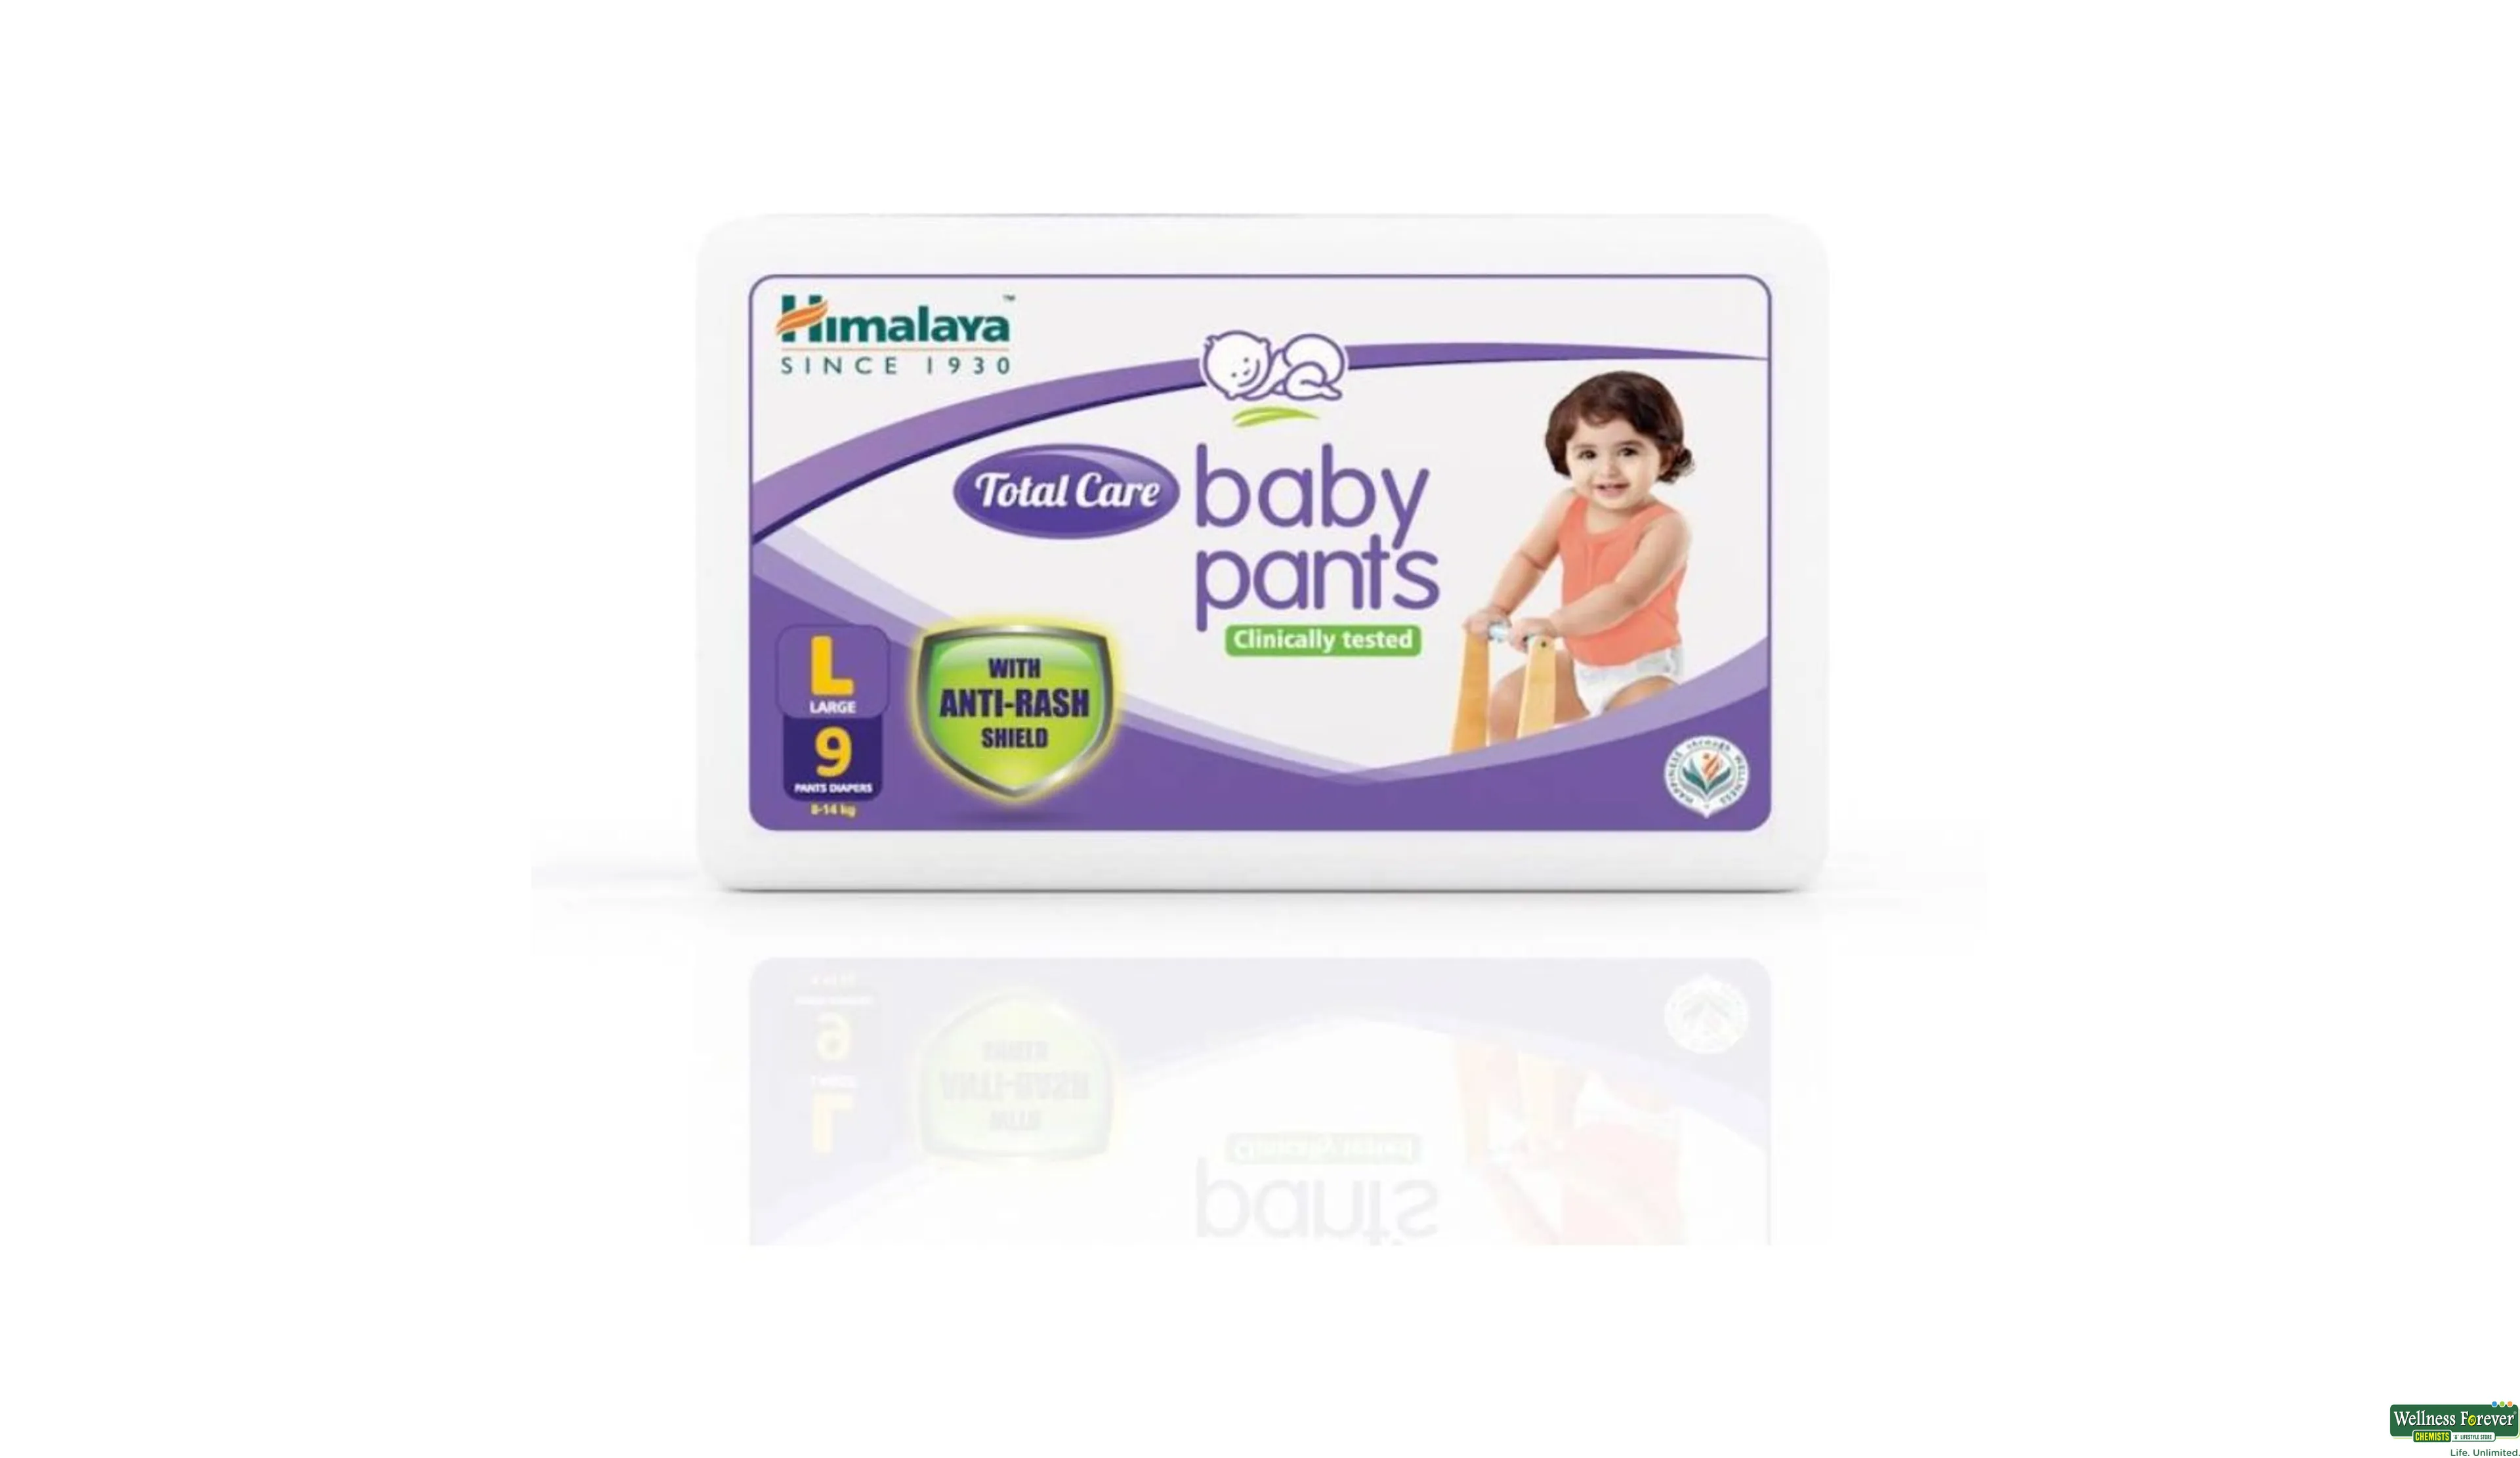 Buy Himalaya Total Care Baby Diaper Pants - Small, Upto 7 kg, With  Anti-Rash Shield Online at Best Price of Rs 262.5 - bigbasket